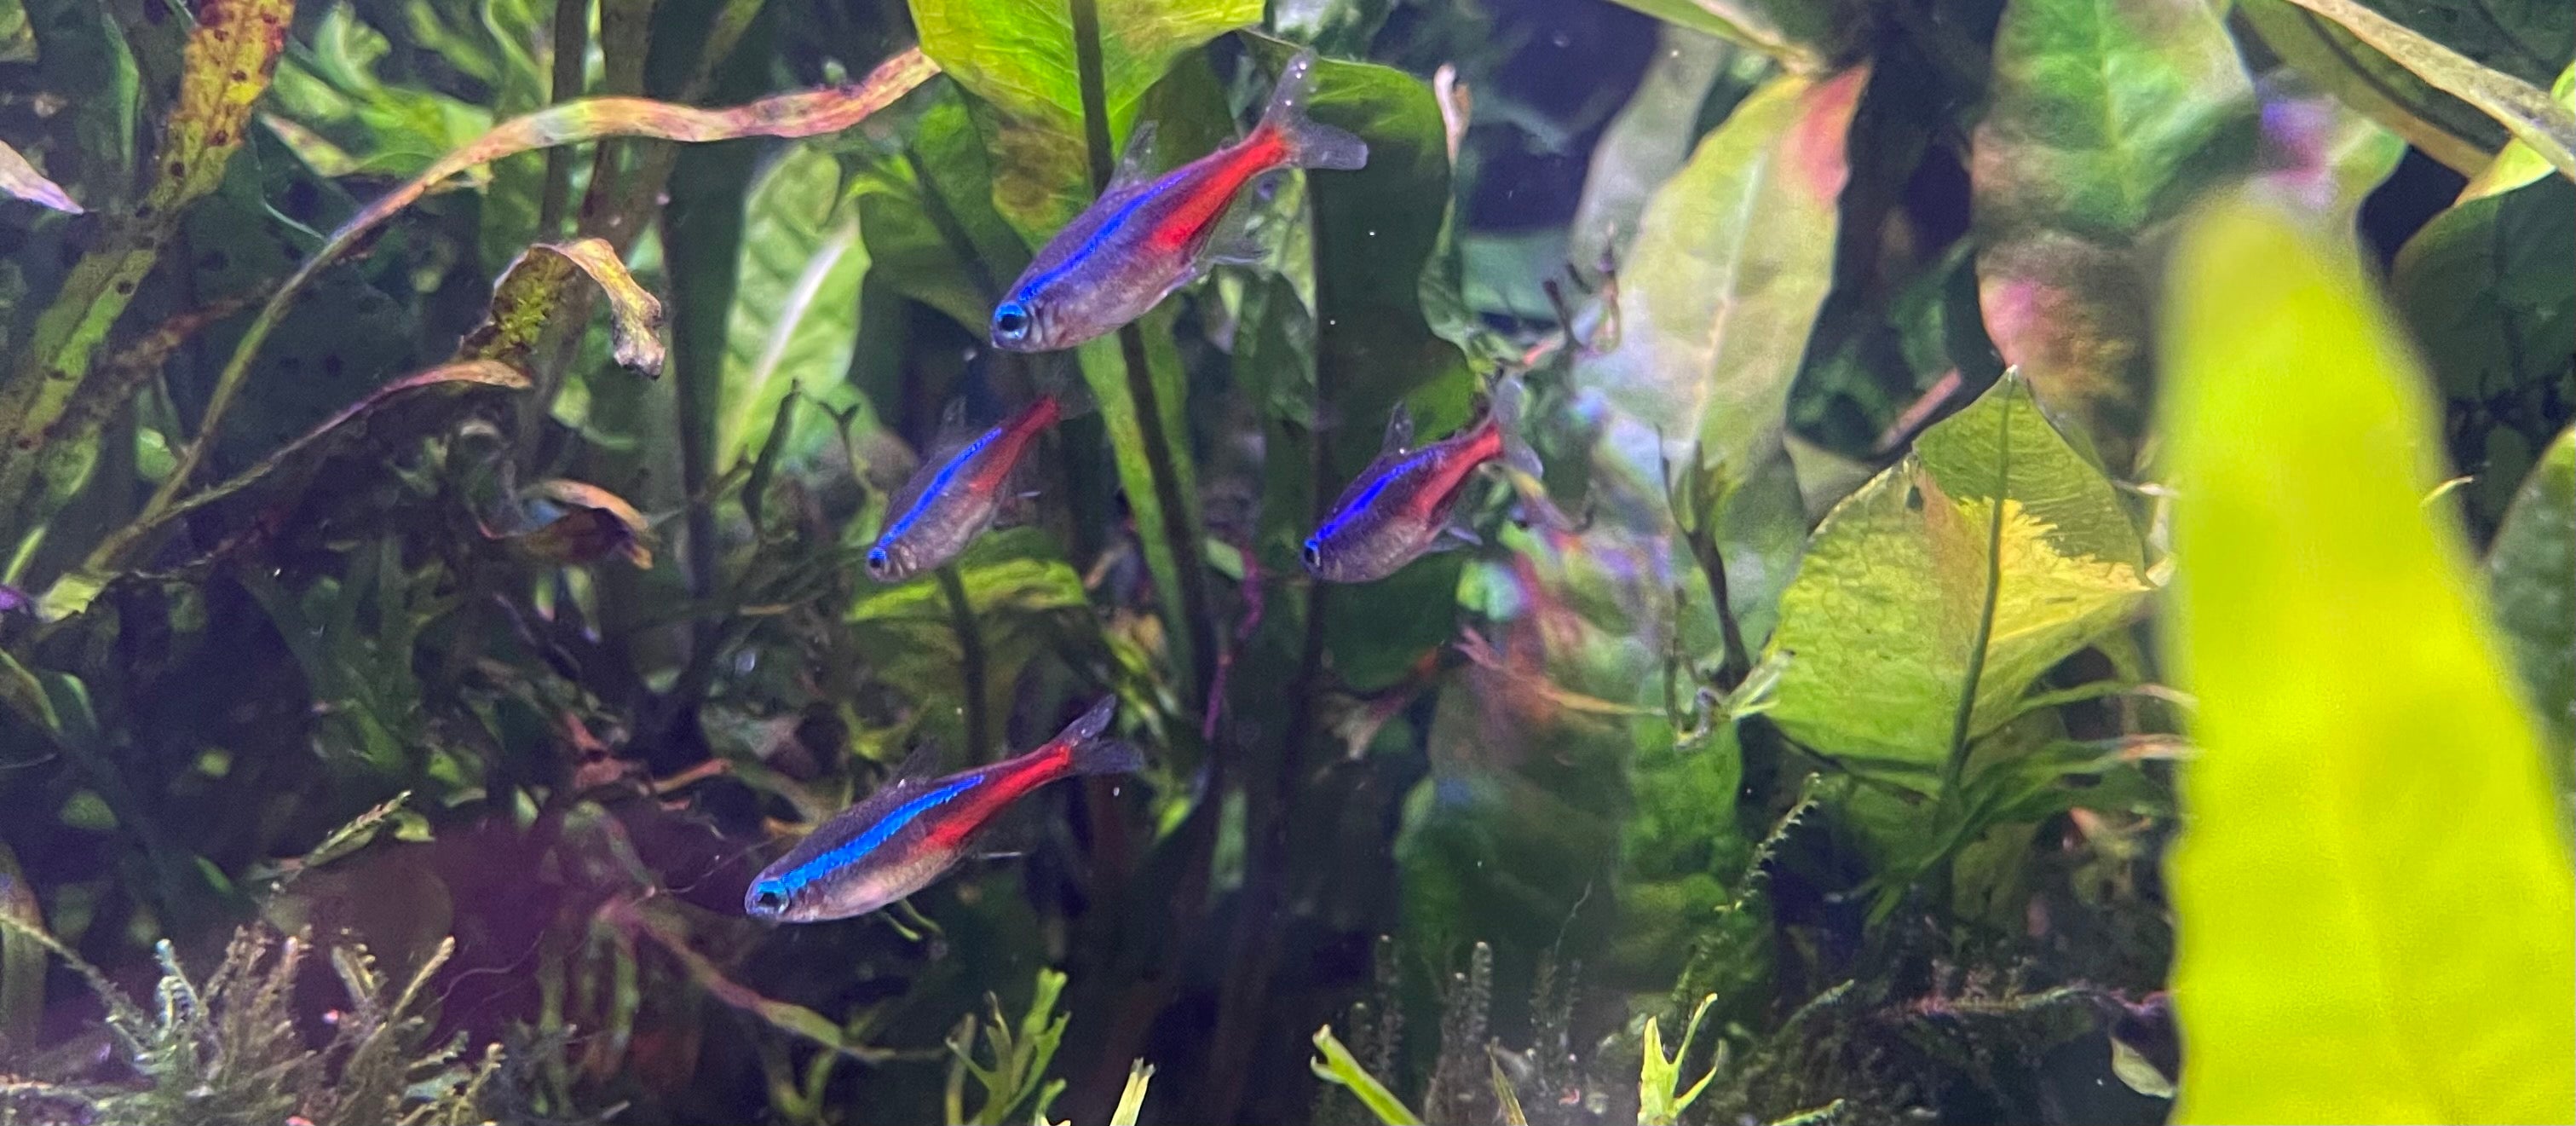 Tetras - Find them now at The Fish Farm